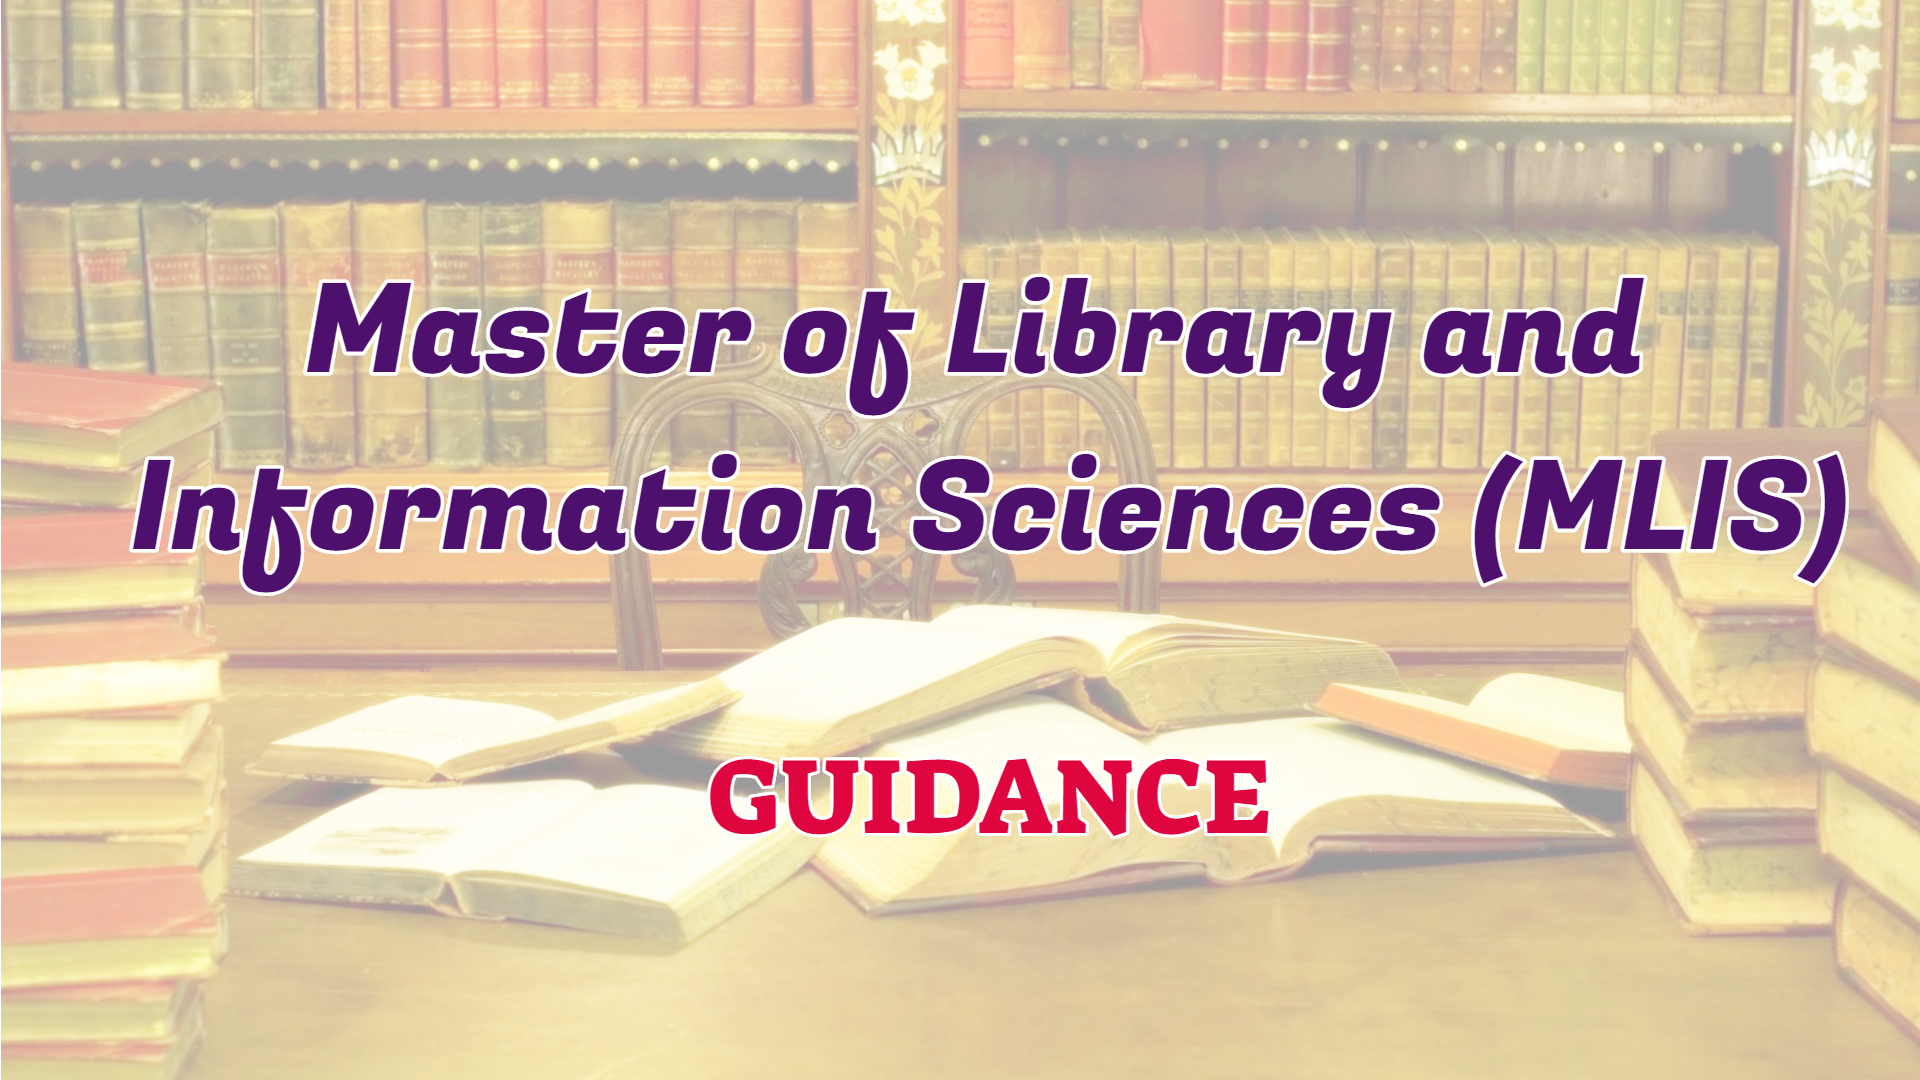 phd in library and information science from ignou